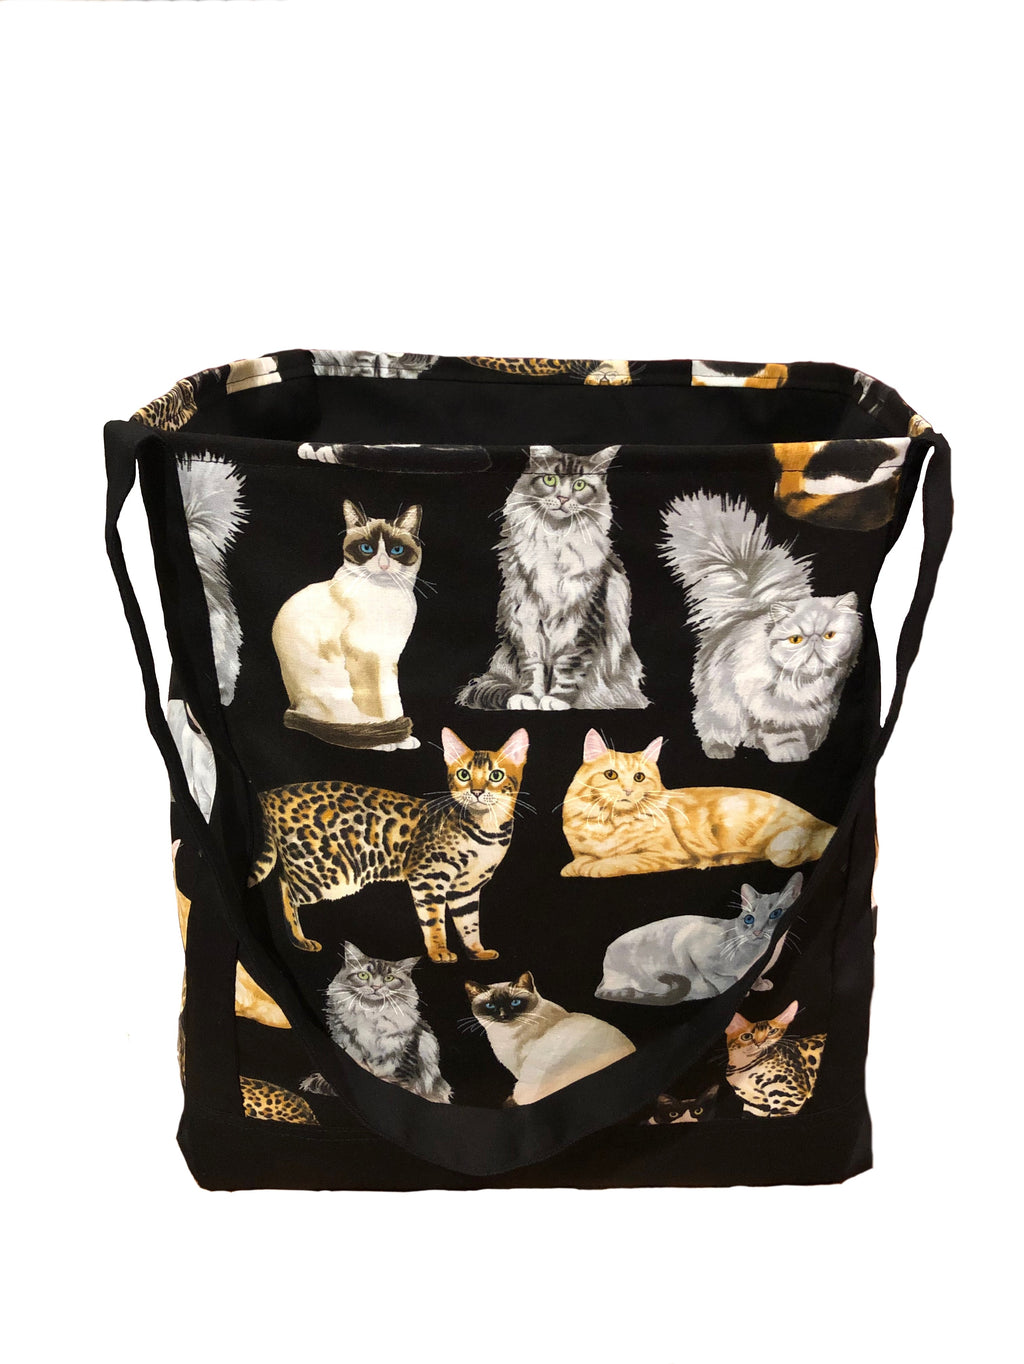 Catlovers bag - Stunning breeds including Bengals, Siamese, Maine Coon, Persian and British Shorthair.